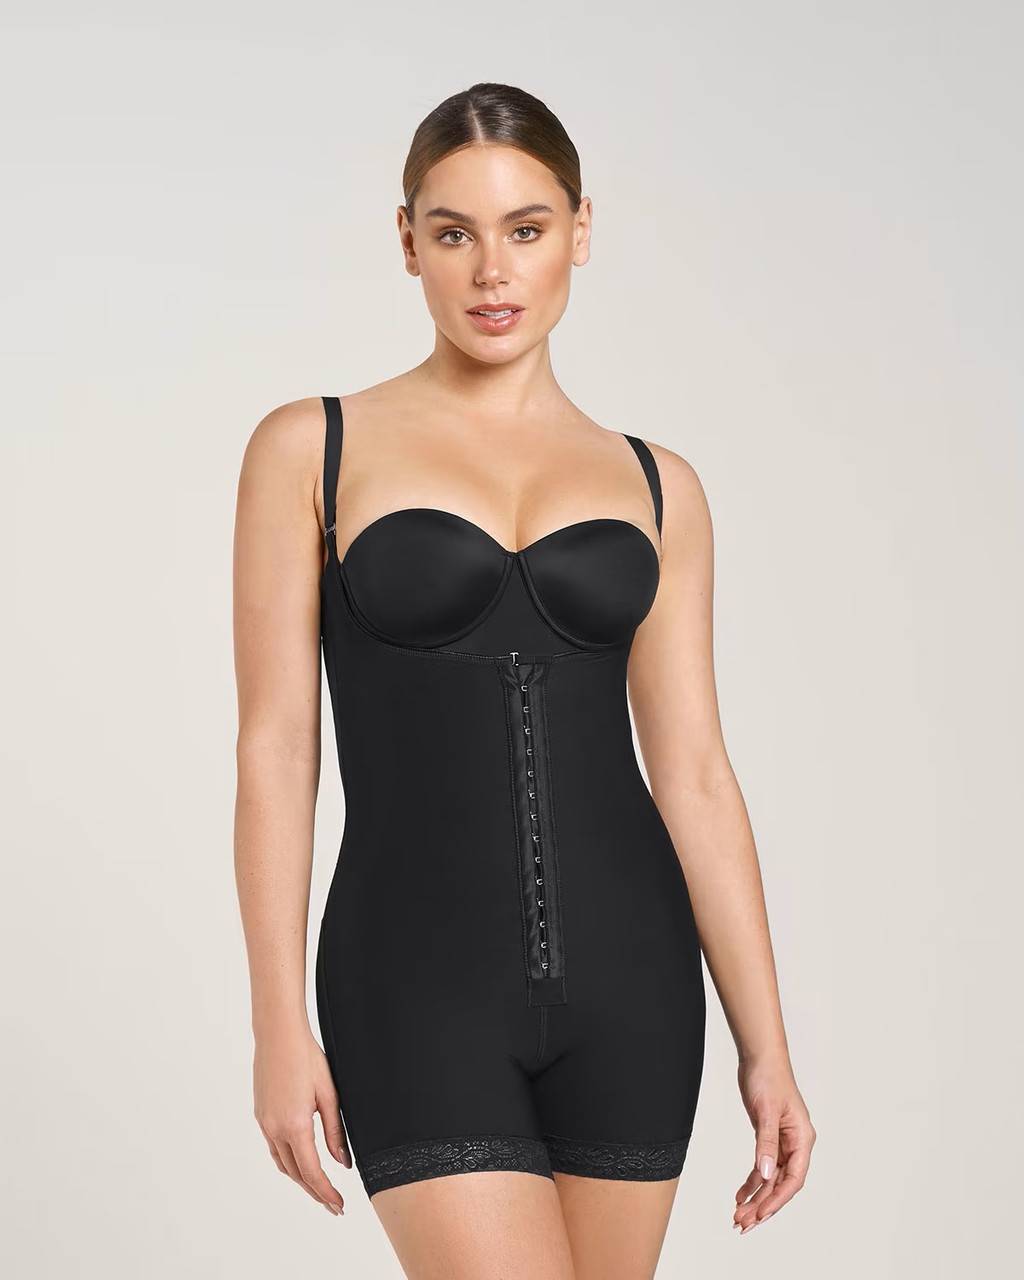 Leonisa 18491 Post-Surgical Firm Compression Short Bottom Body Shaper -  Front Hook - Mastectomy Shop